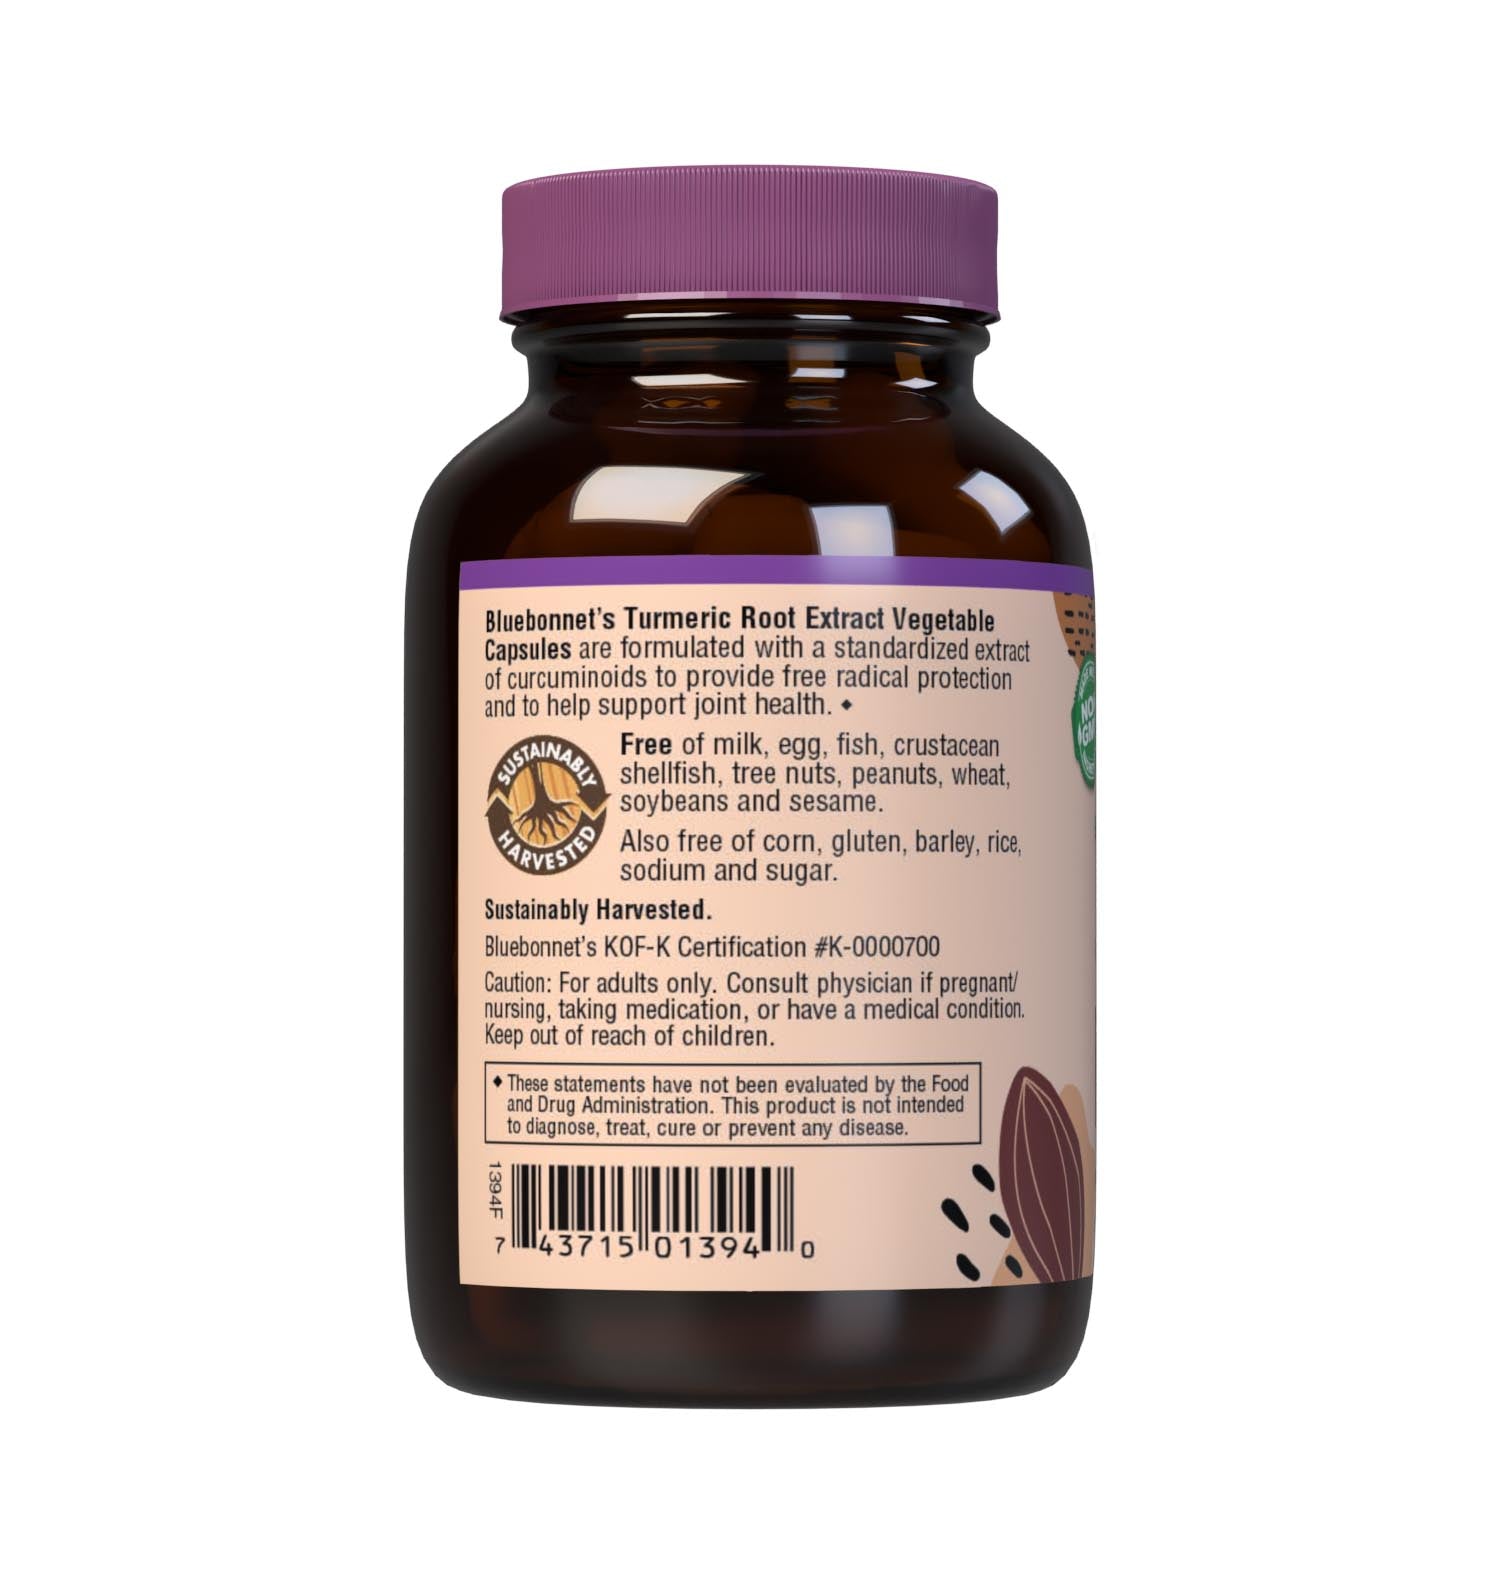 Bluebonnet’s Turmeric Root Extract 60 Capsules provide a standardized extract of total curcuminoids, the most researched active constituents found in turmeric. A clean and gentle water-based extraction method is employed to capture and preserve turmeric’s most valuable components. Description panel. #size_60 count